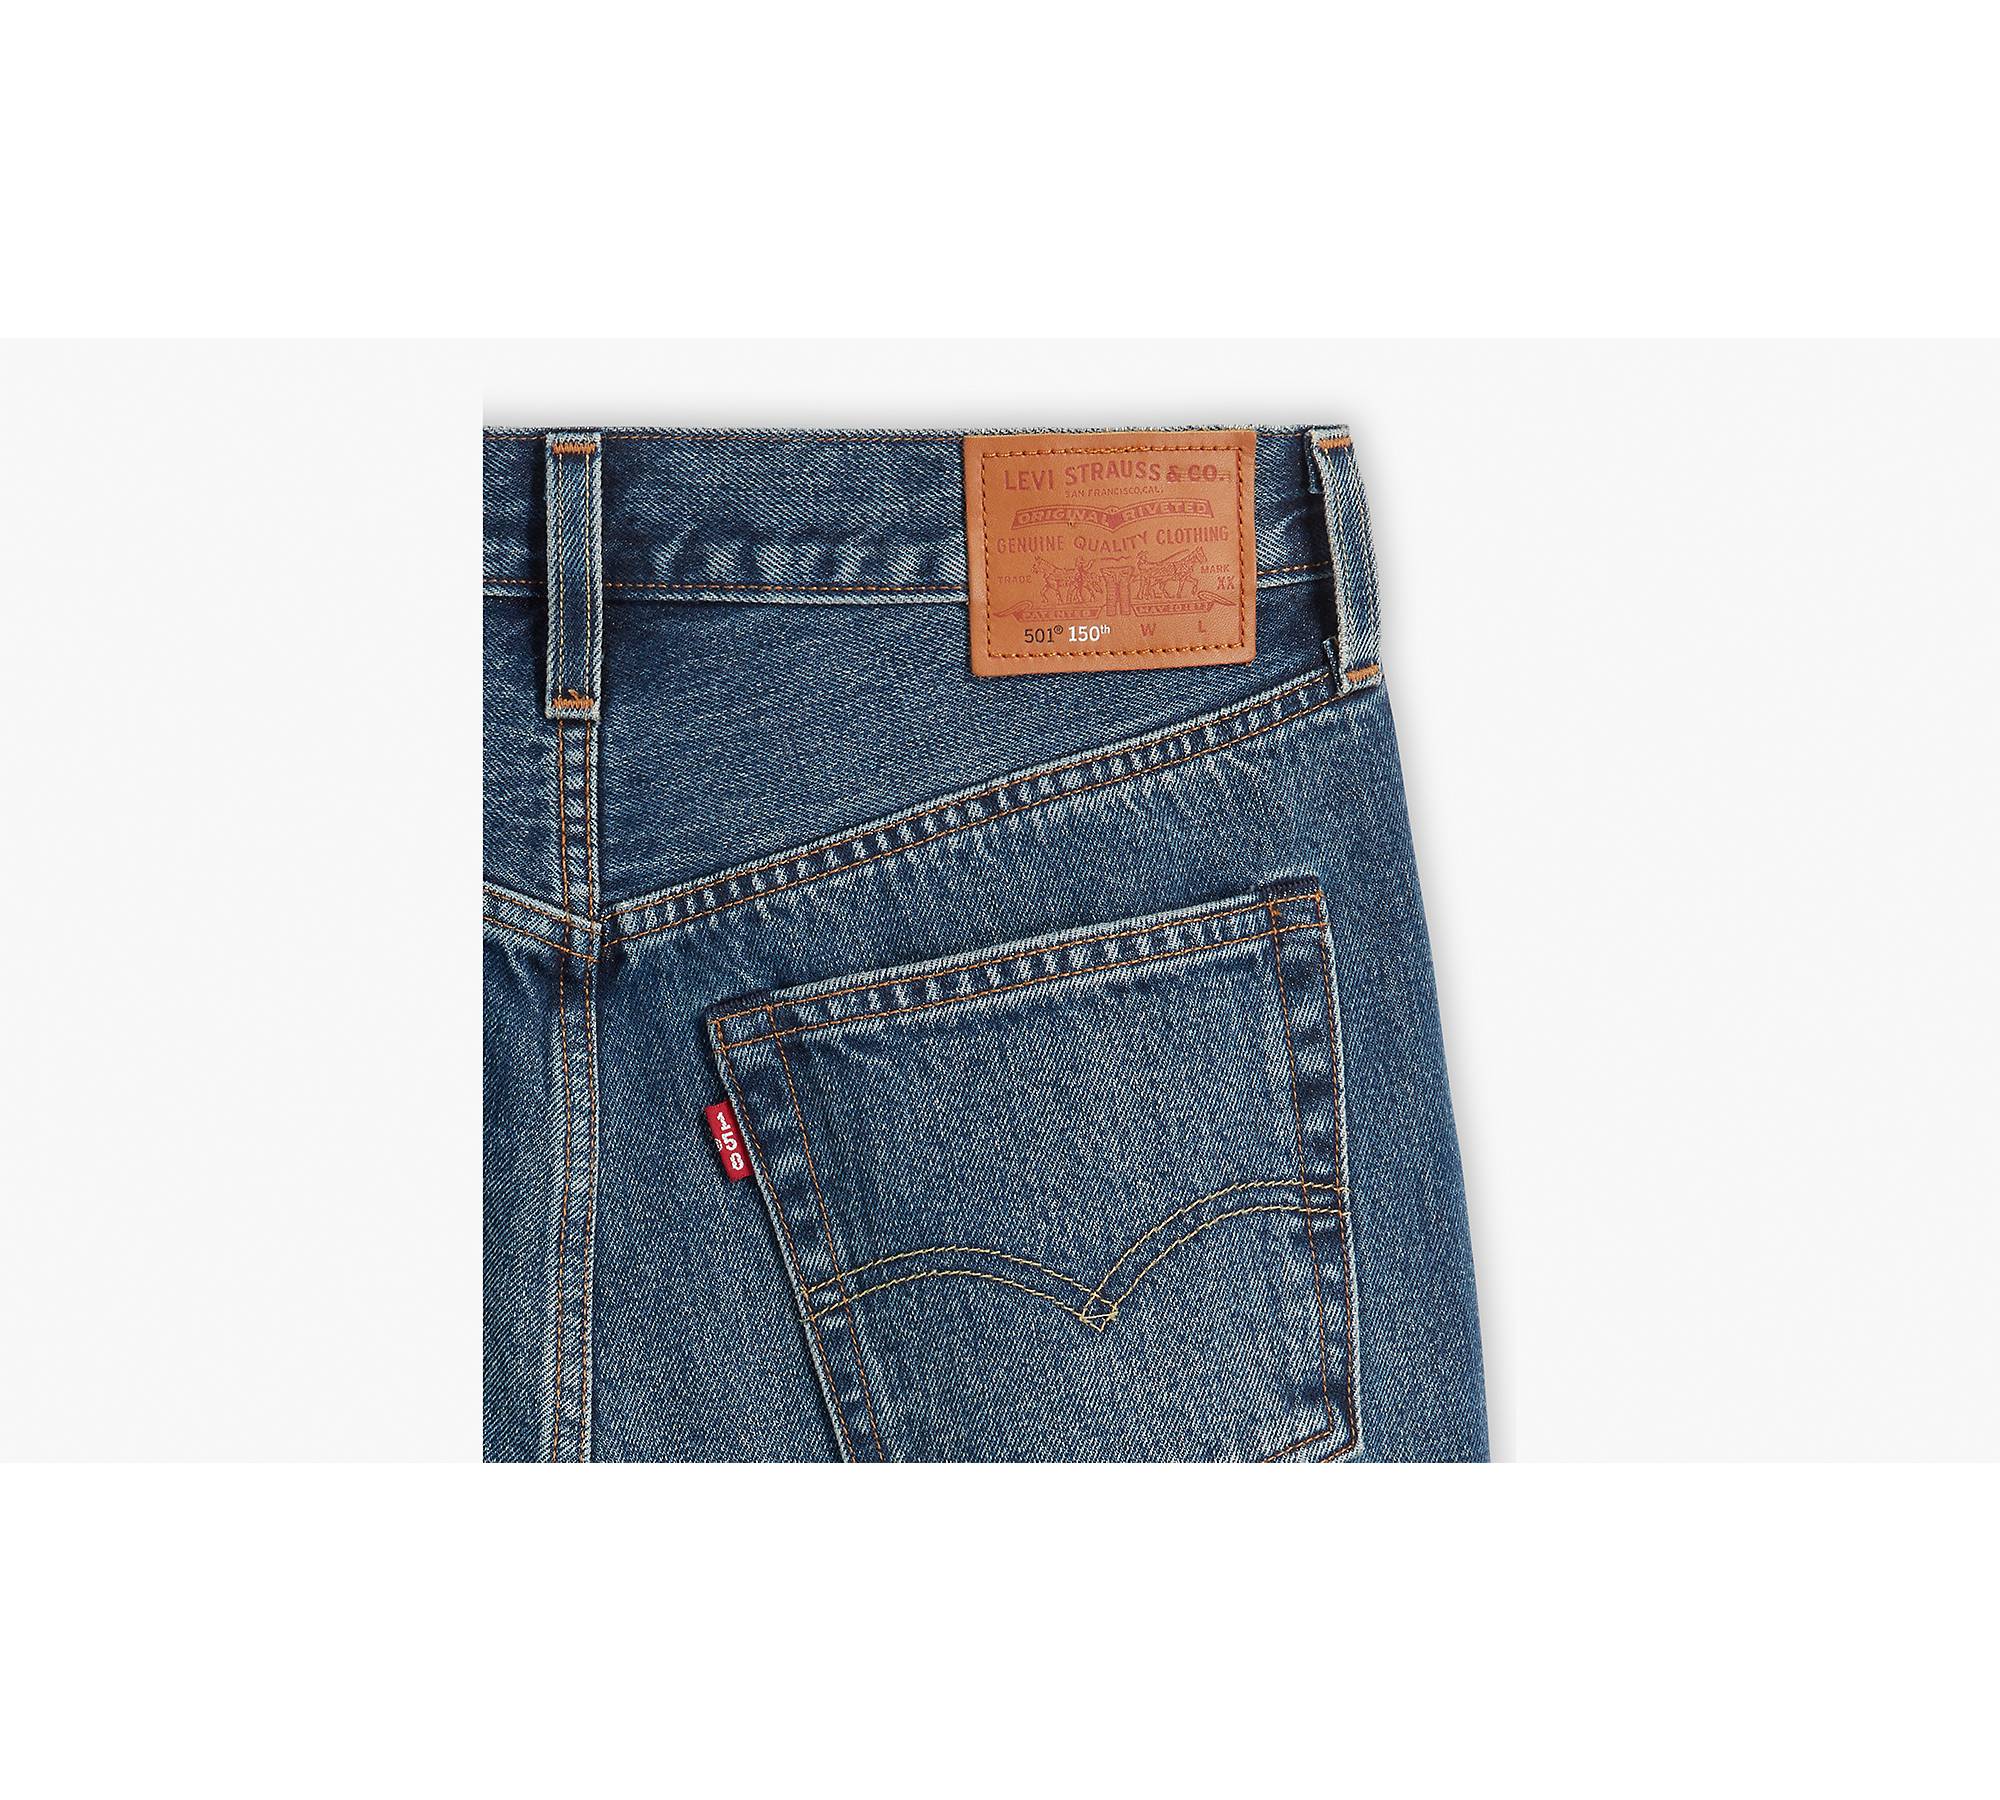 Celebrating the Birth of the Levi's® 501® Jean - Levi Strauss & Co